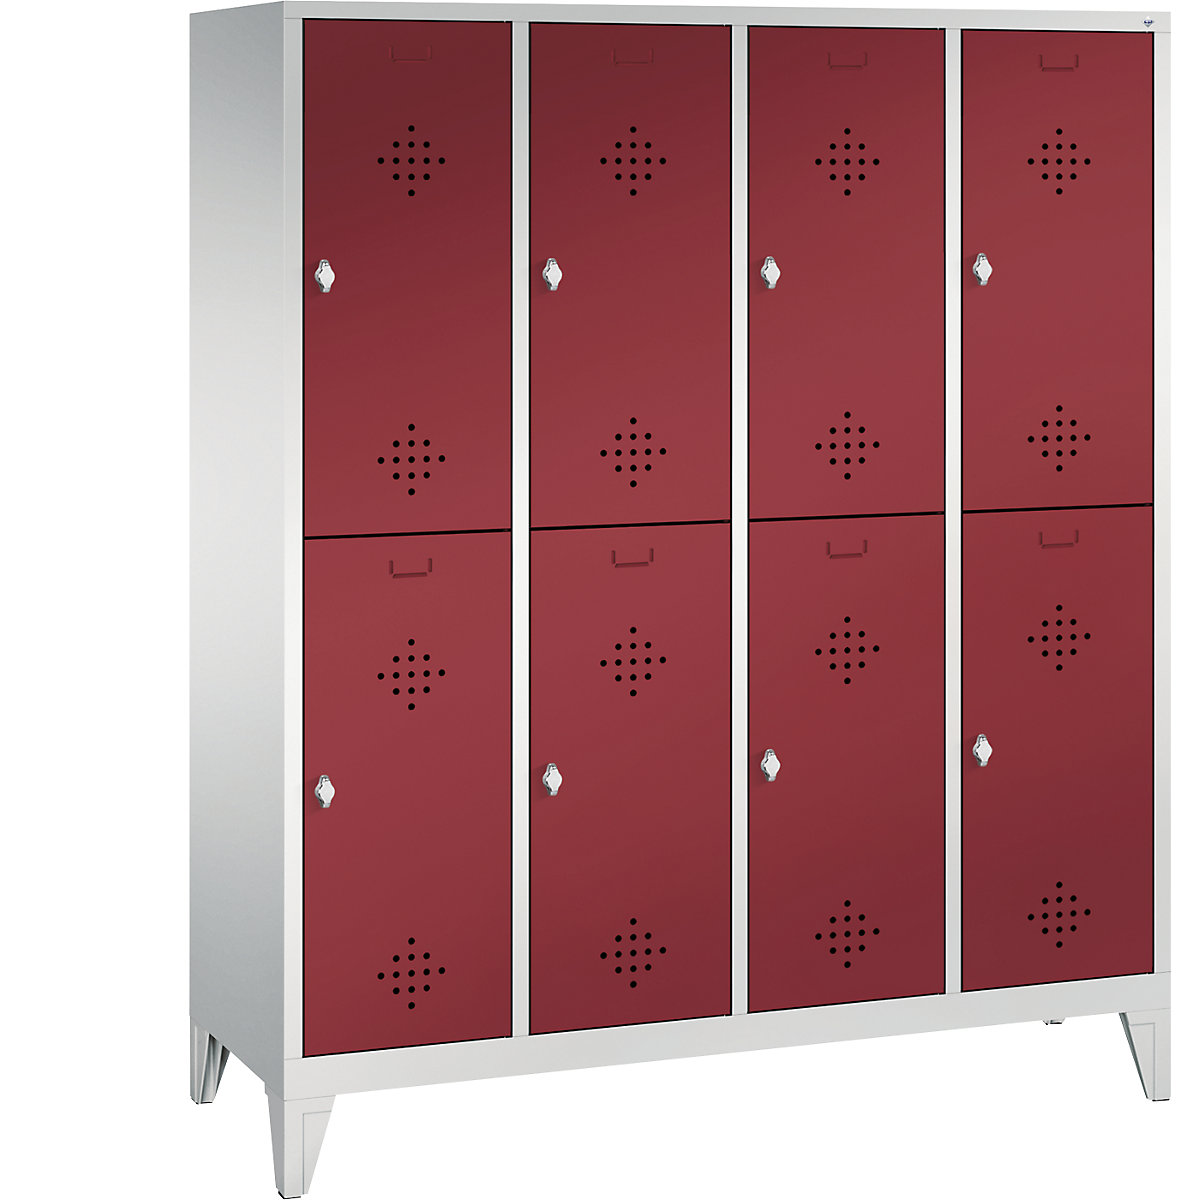 CLASSIC cloakroom locker with feet, double tier – C+P, 4 compartments, 2 shelf compartments each, compartment width 400 mm, light grey / ruby red-12